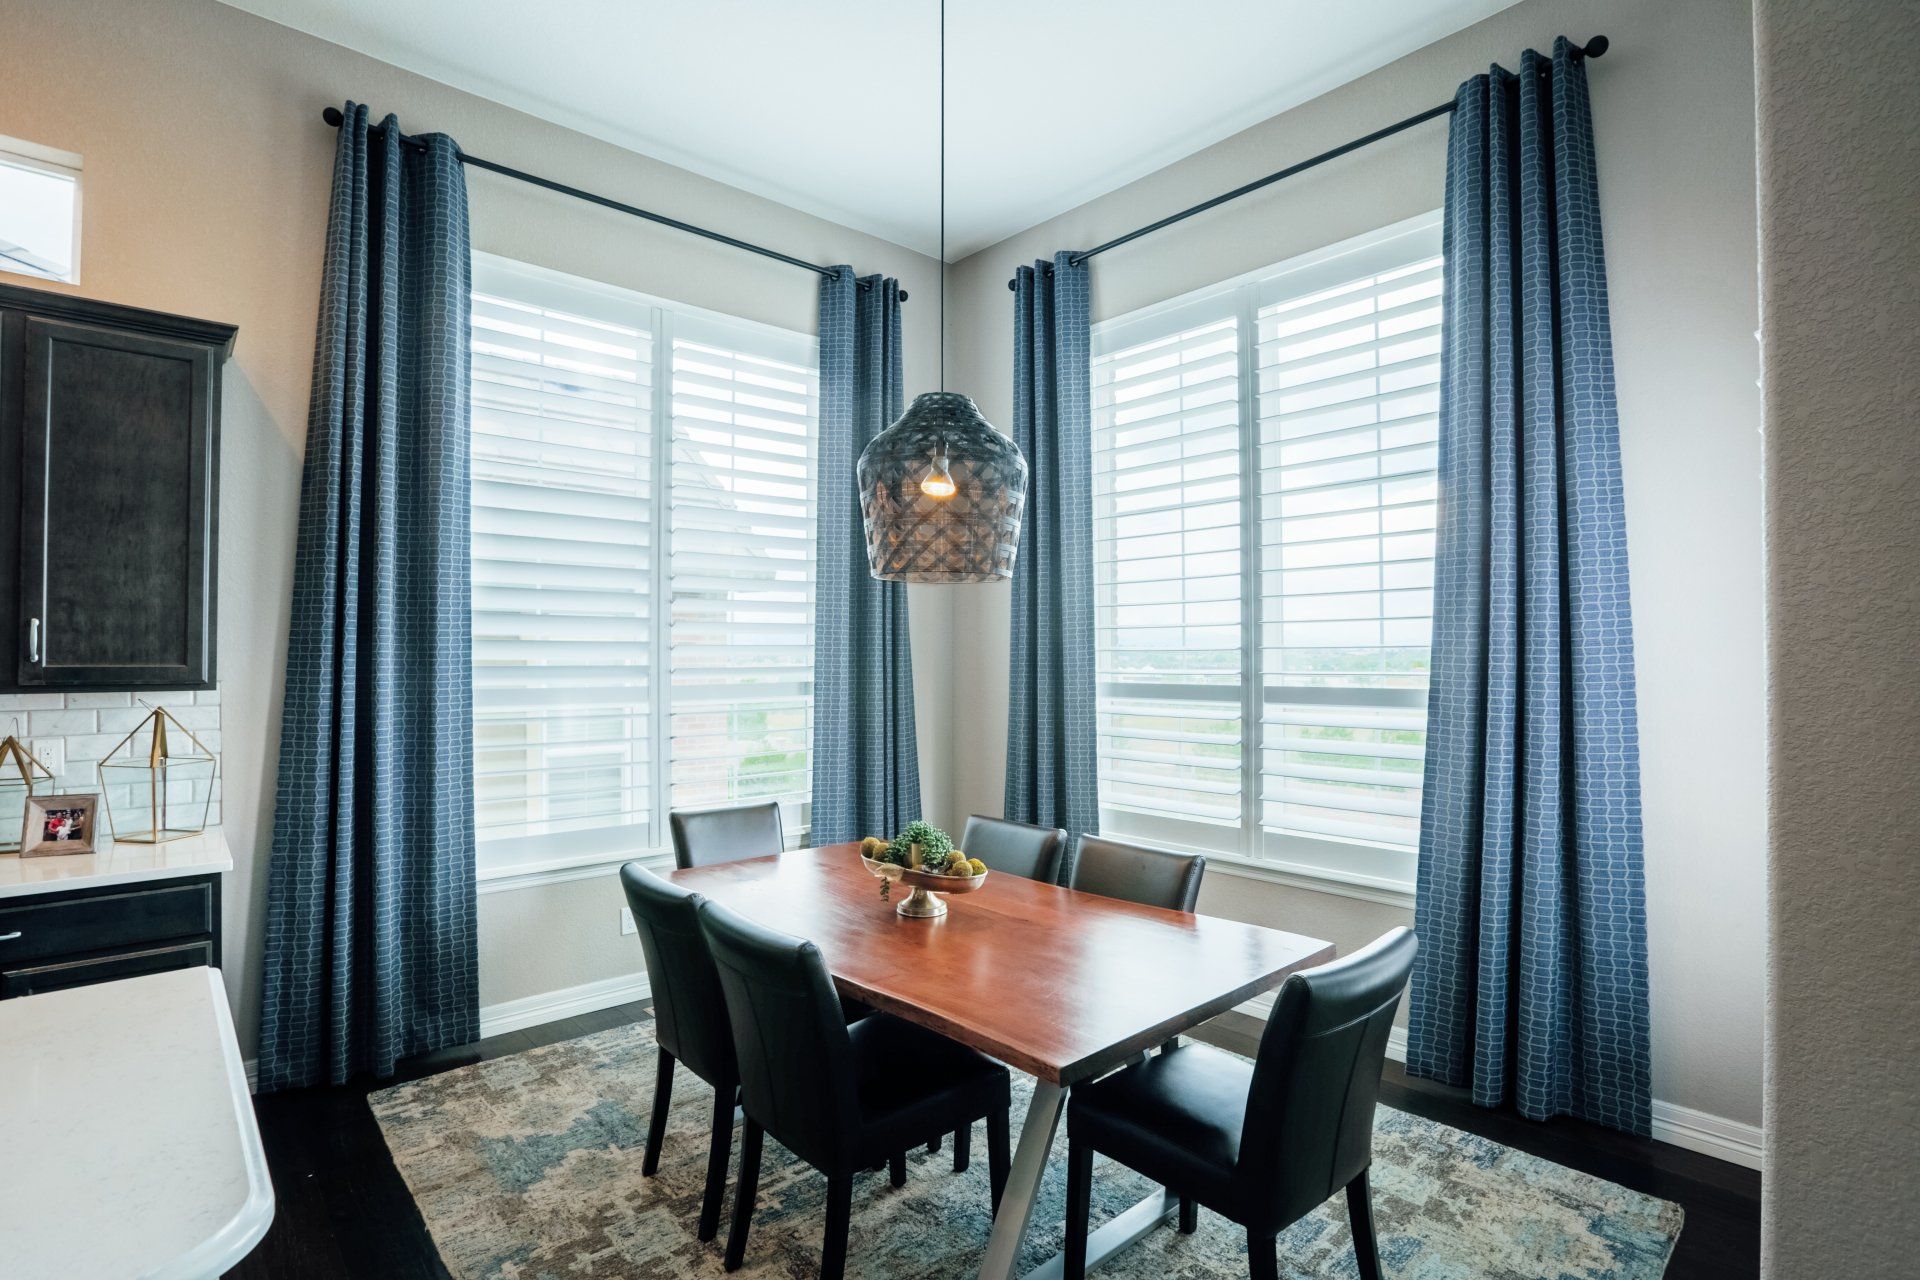 Dining table with black leather chairs in front of gathered blue and white patterned drapery